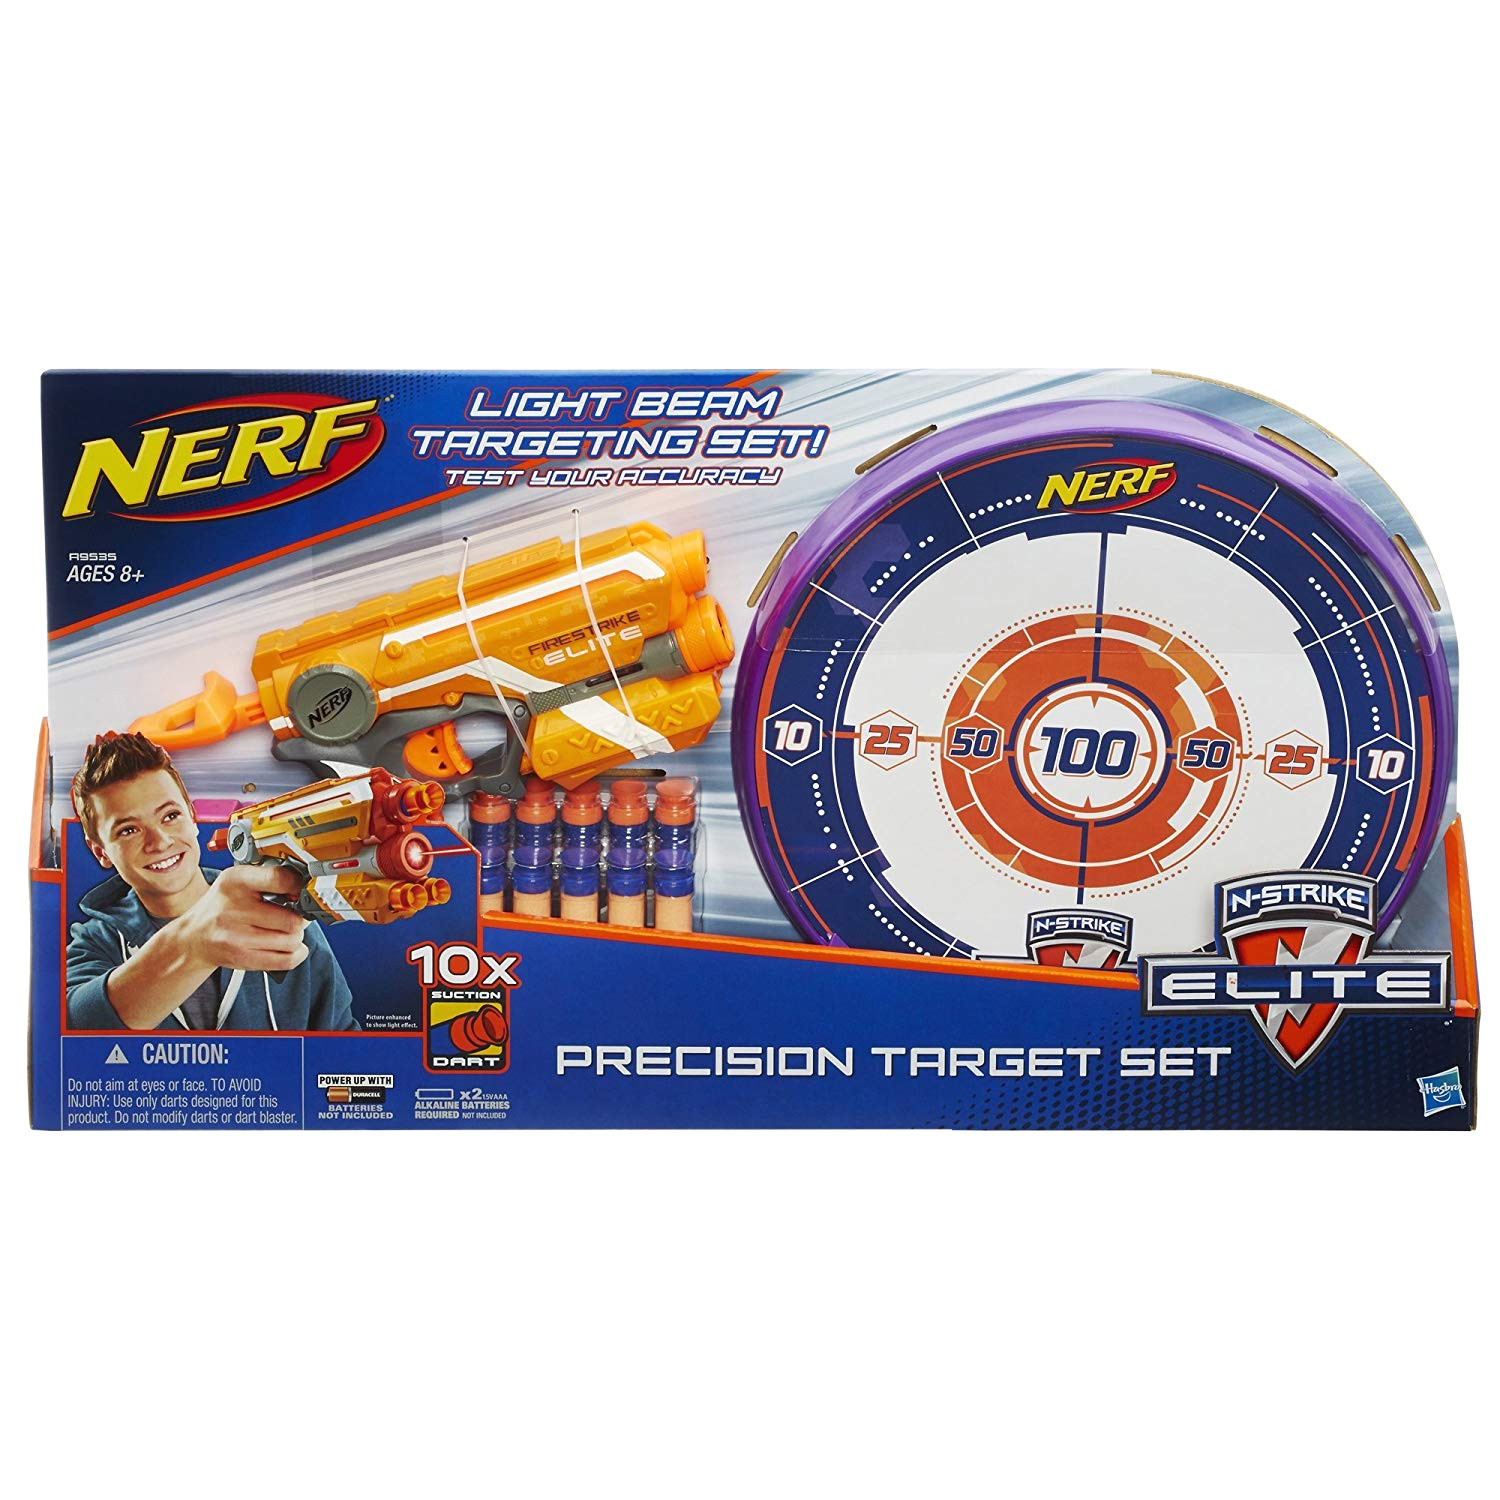 this will be a good gift for 8 years old boys who want to get some target practice in their spare time